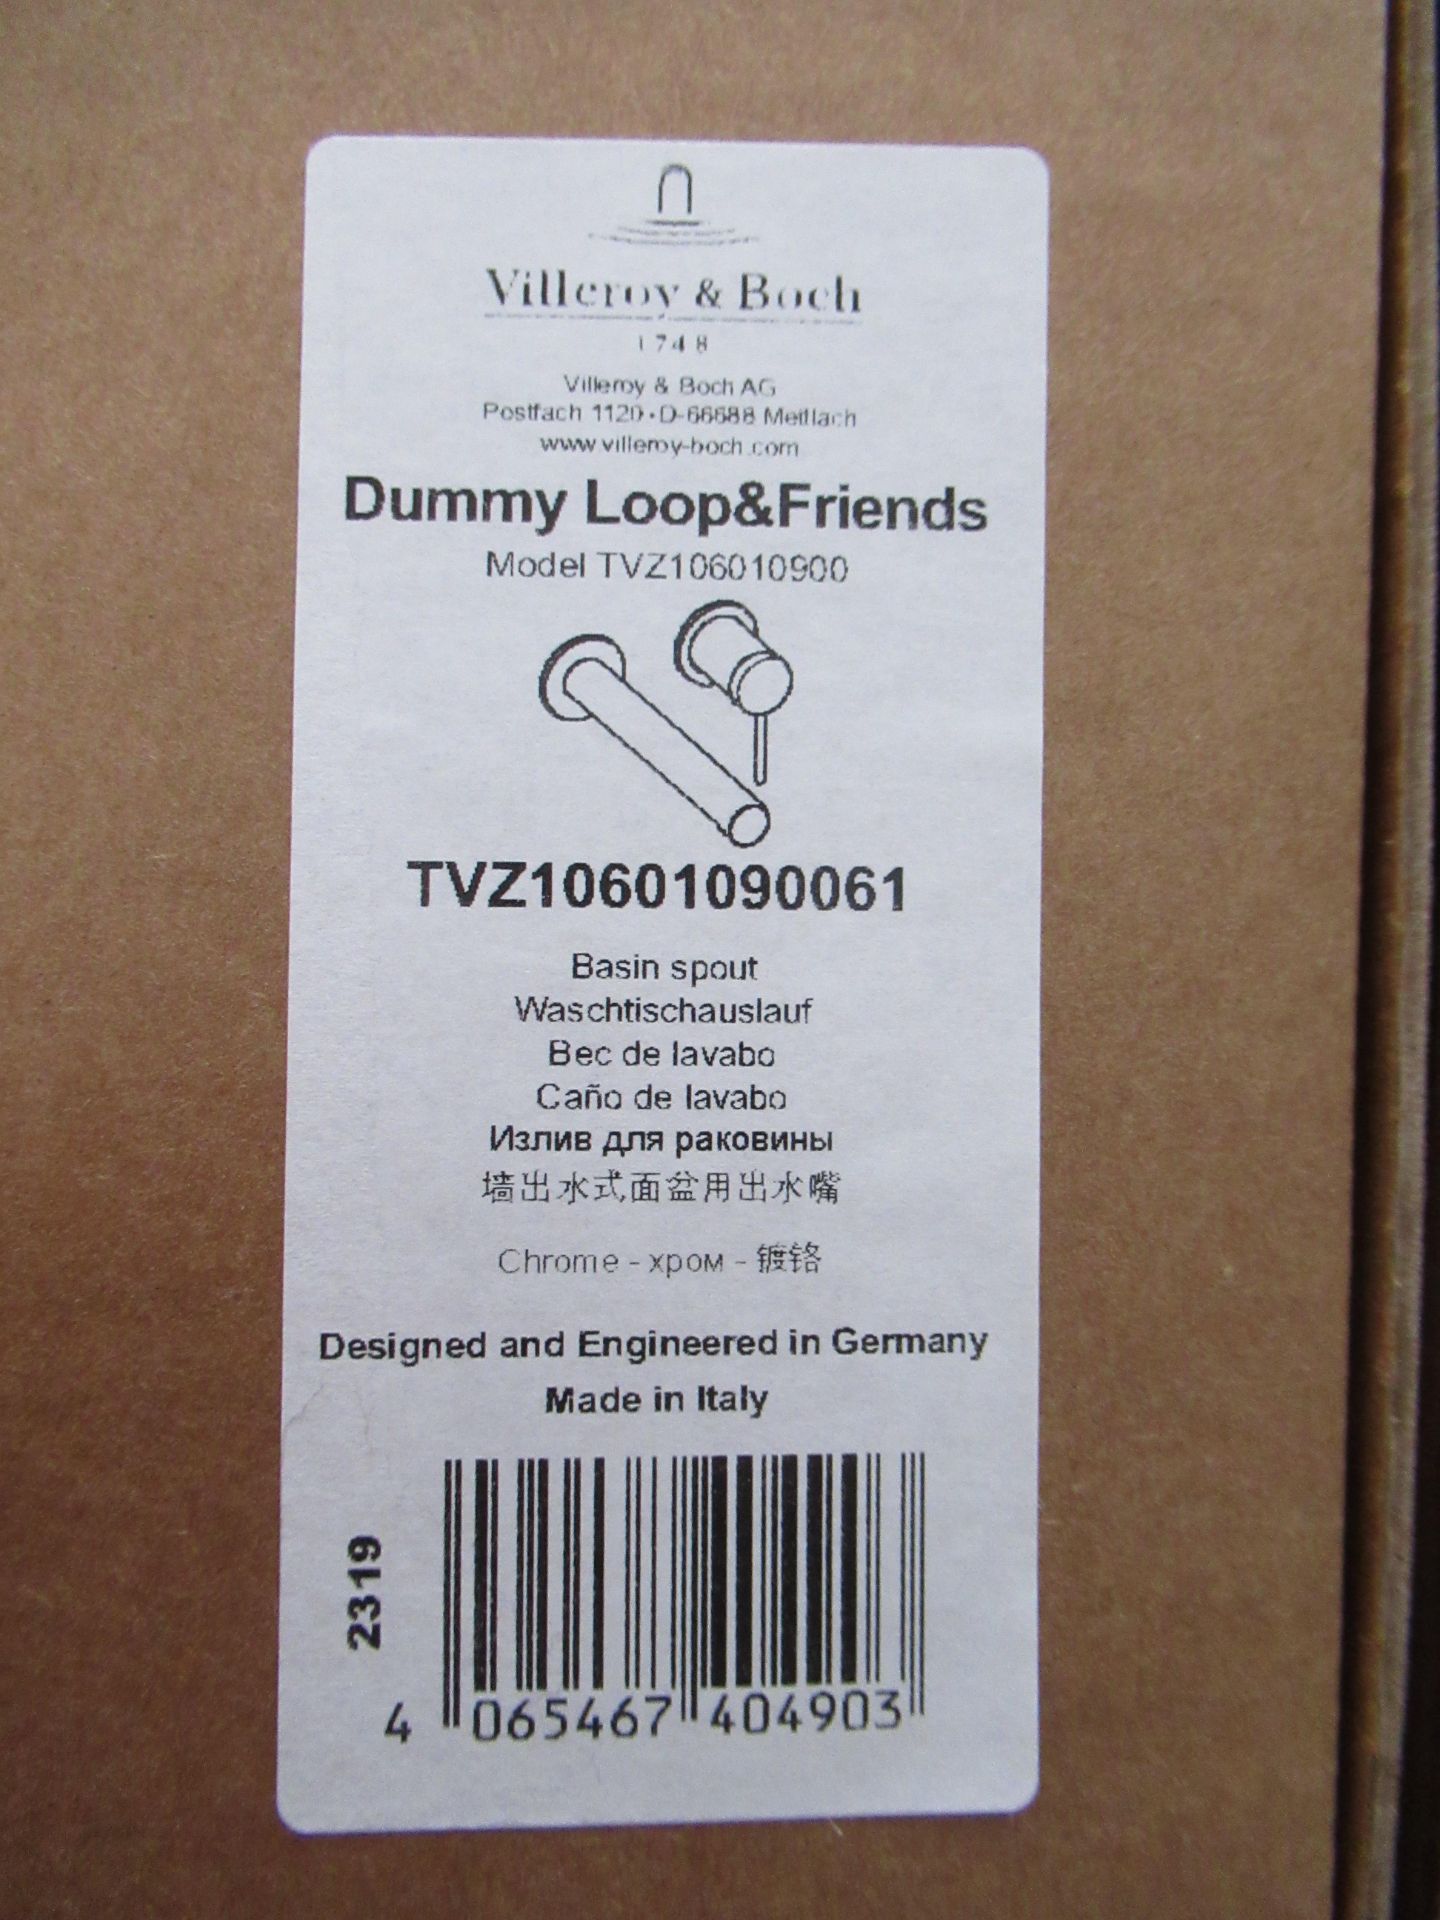 12 x Villeroy and Boch Dummy Loop and Friends Display Items - Image 2 of 2